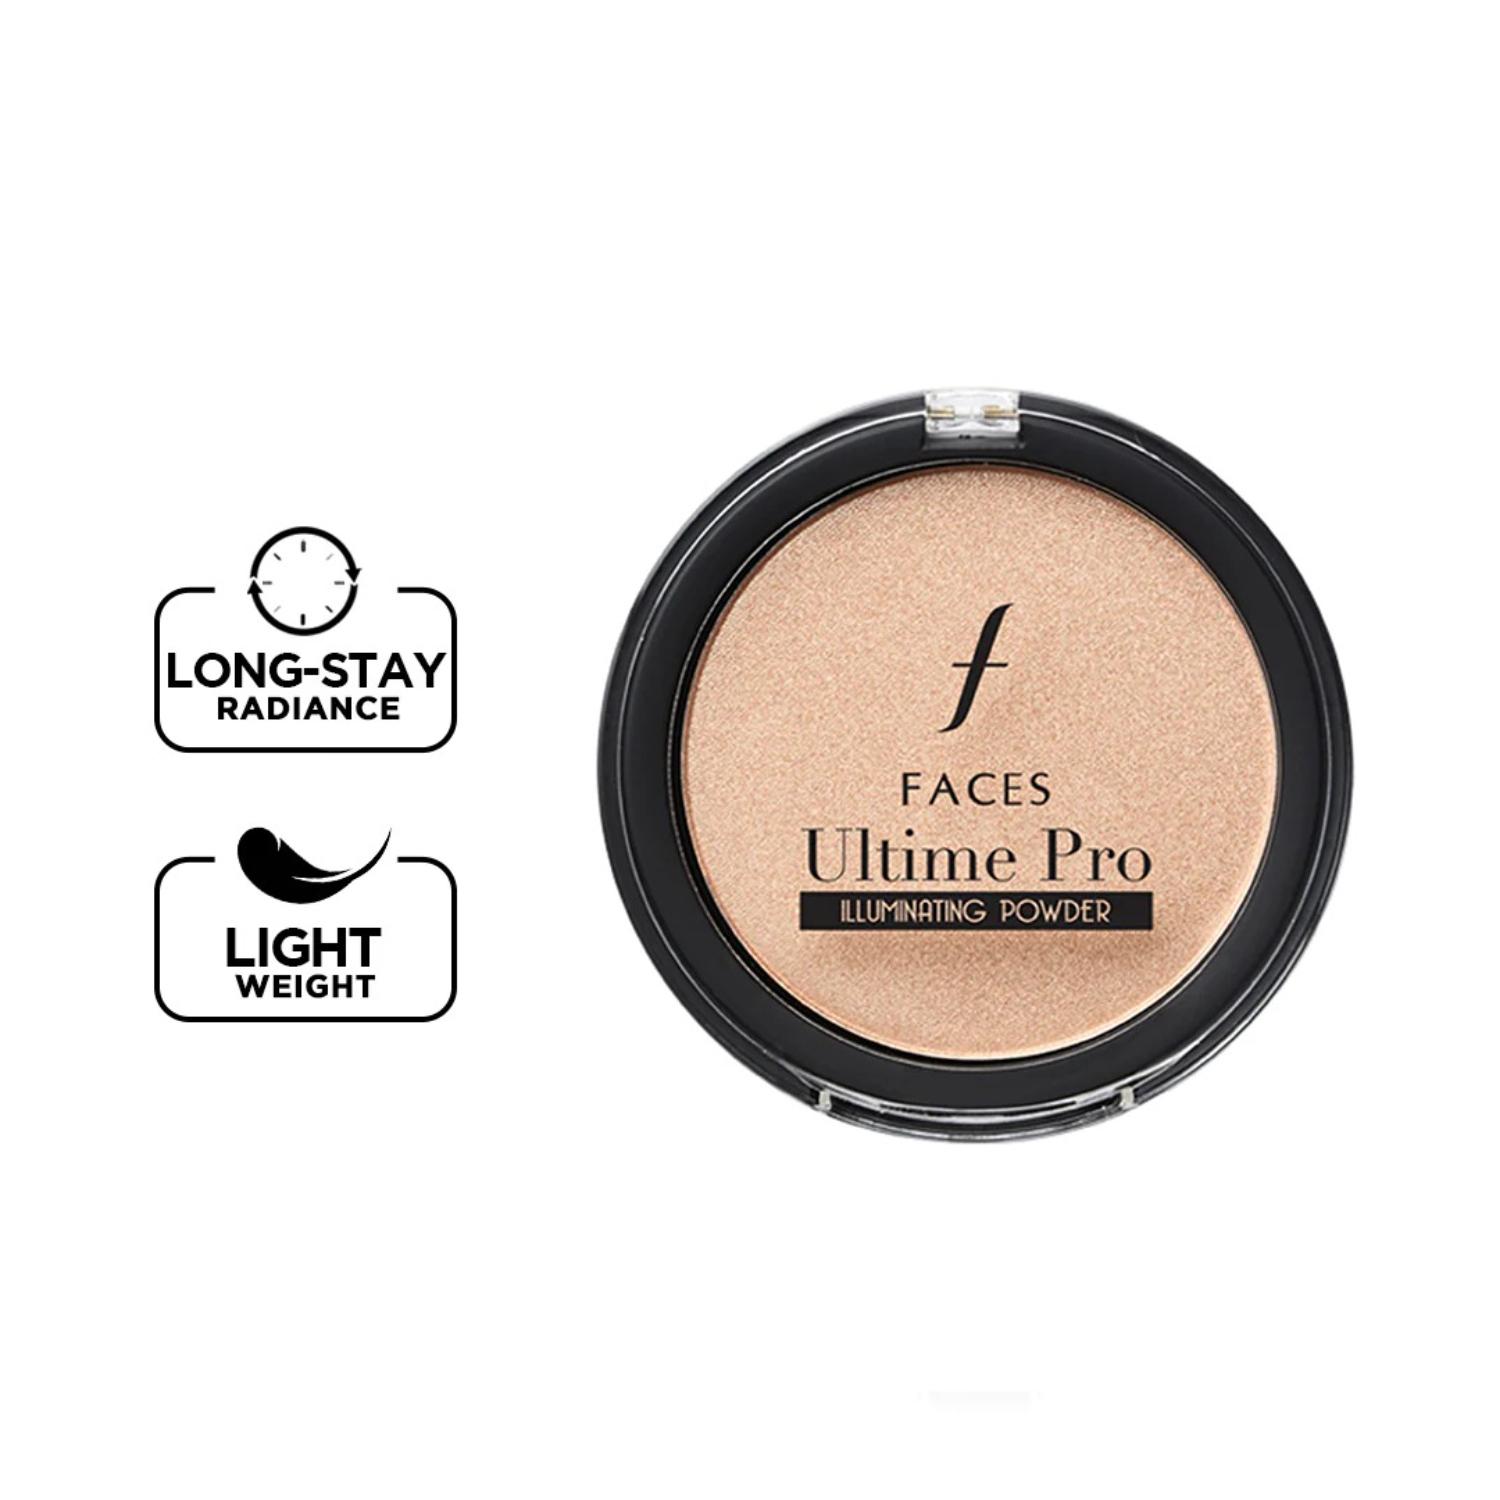 Faces Canada | Faces Canada Ultime Pro Illuminating Powder, Long Lasting Radiance, Oil Control (9 g)